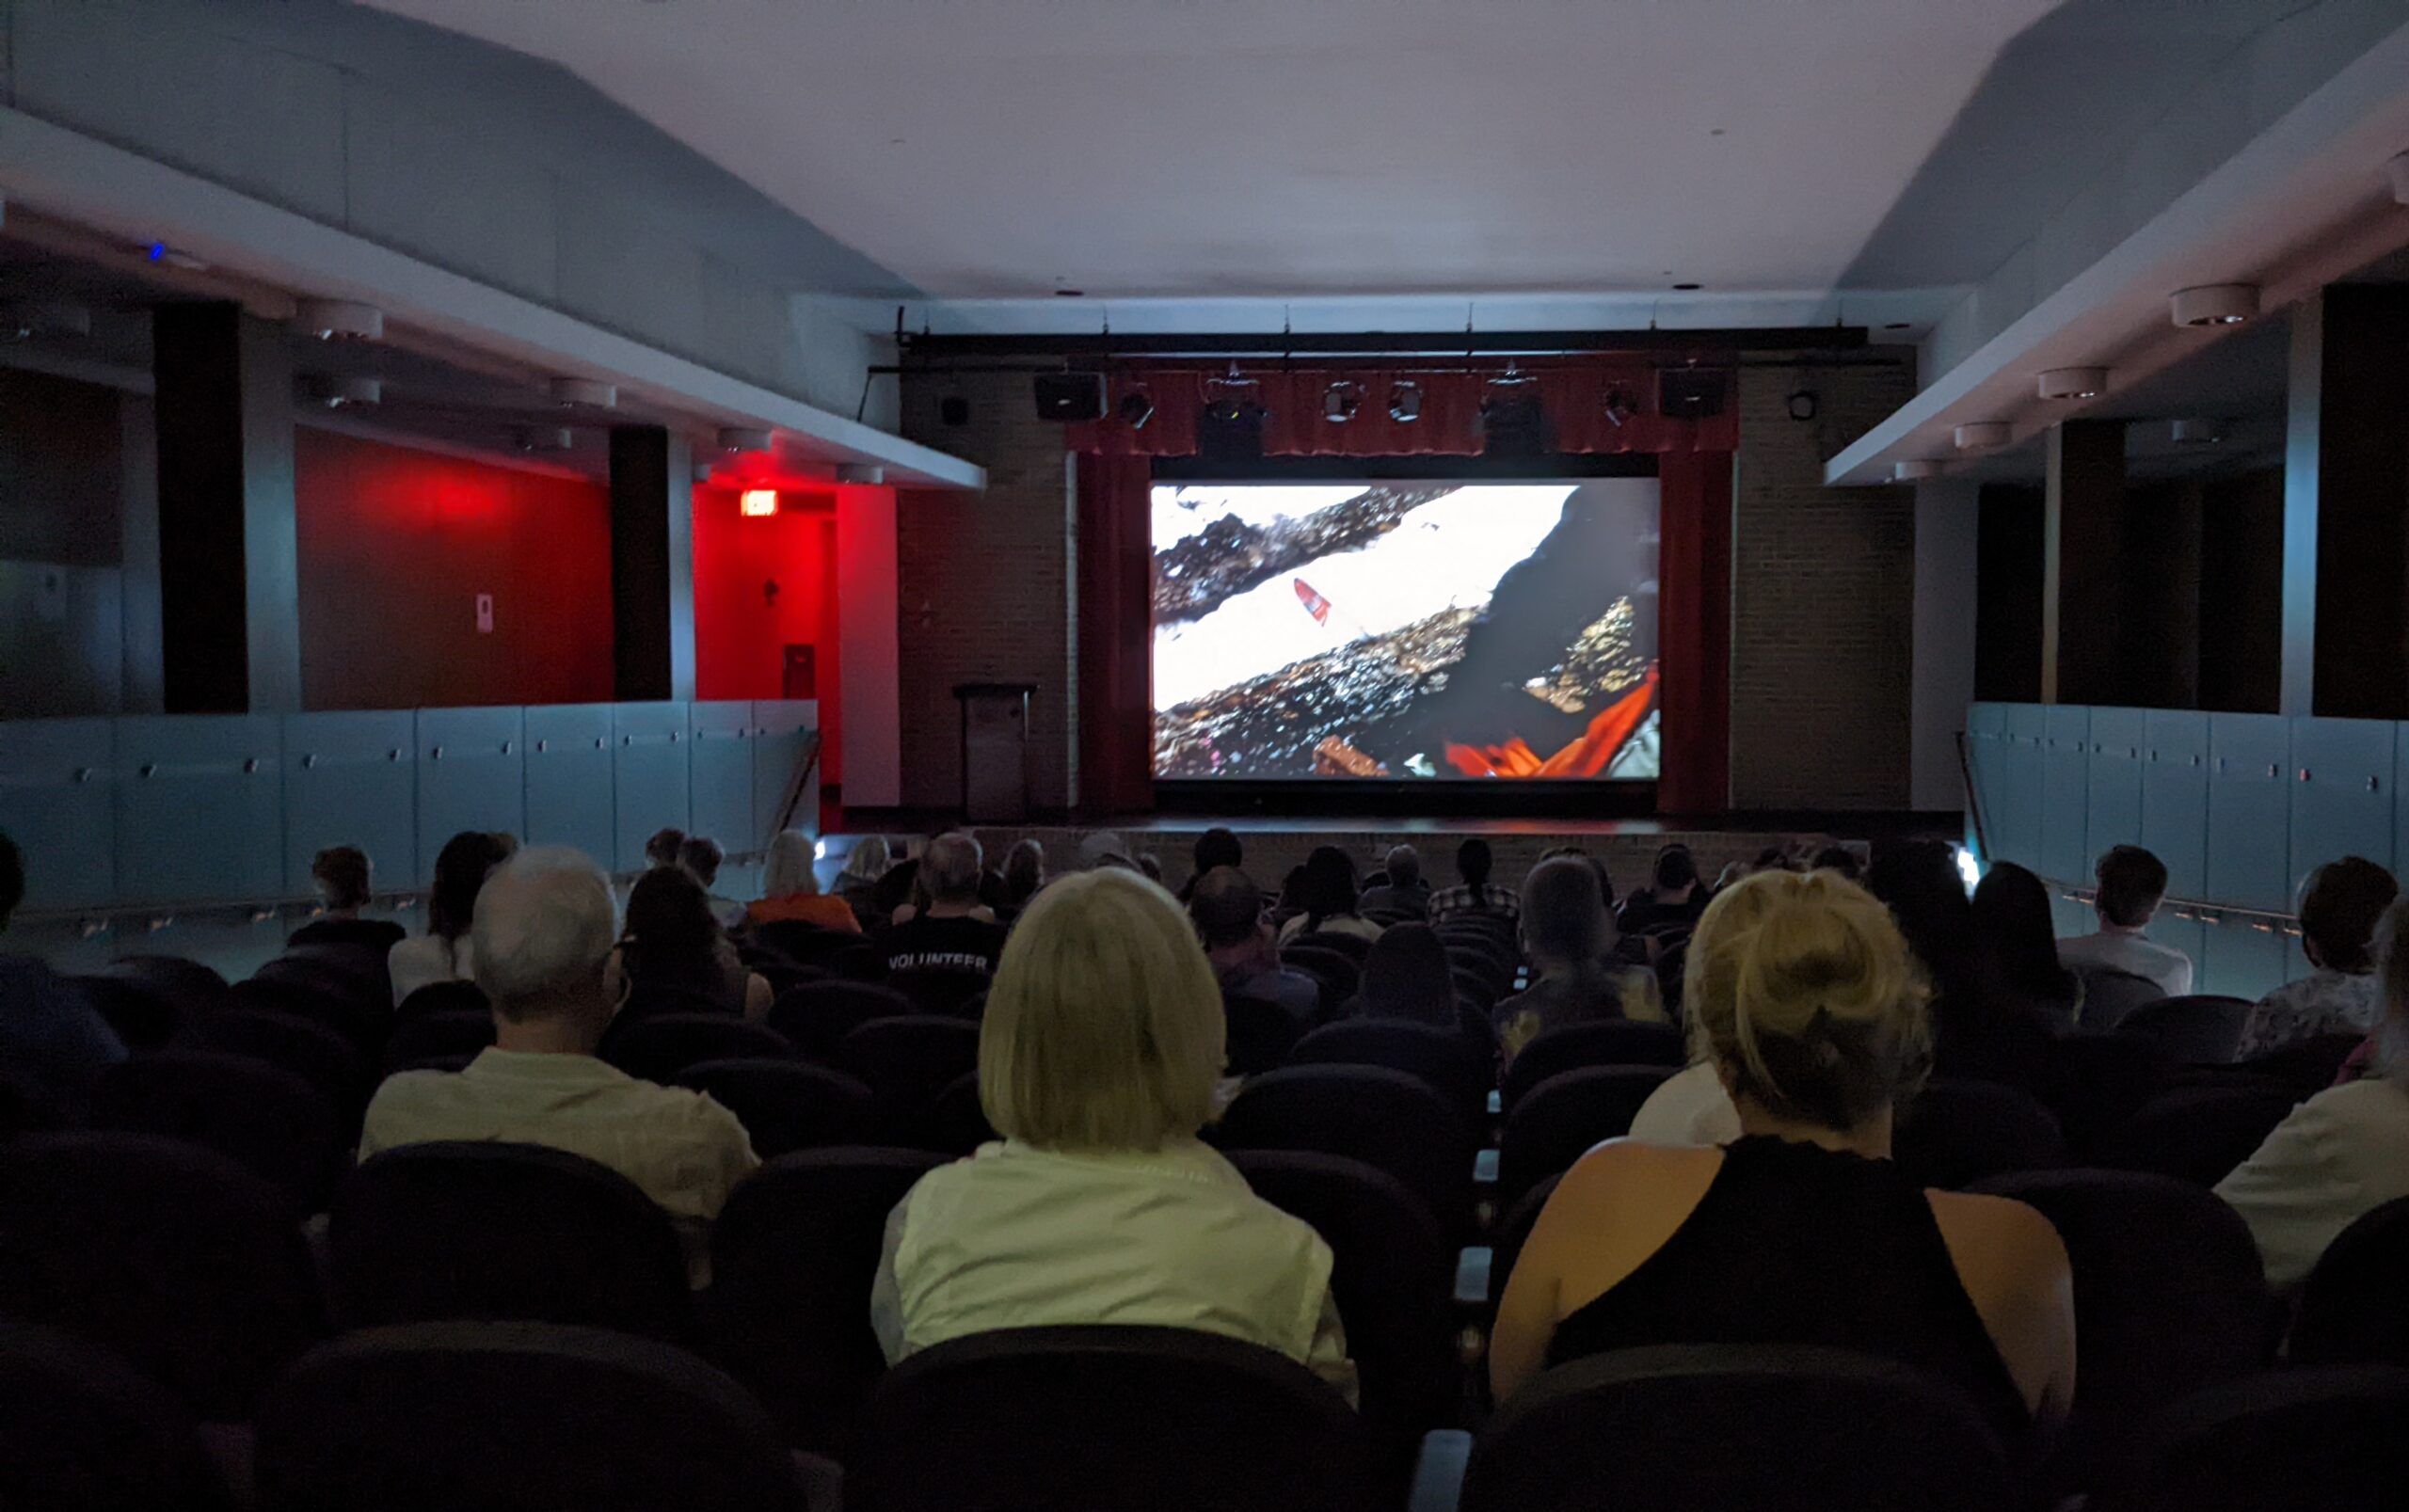 A theatre of people watching a movie